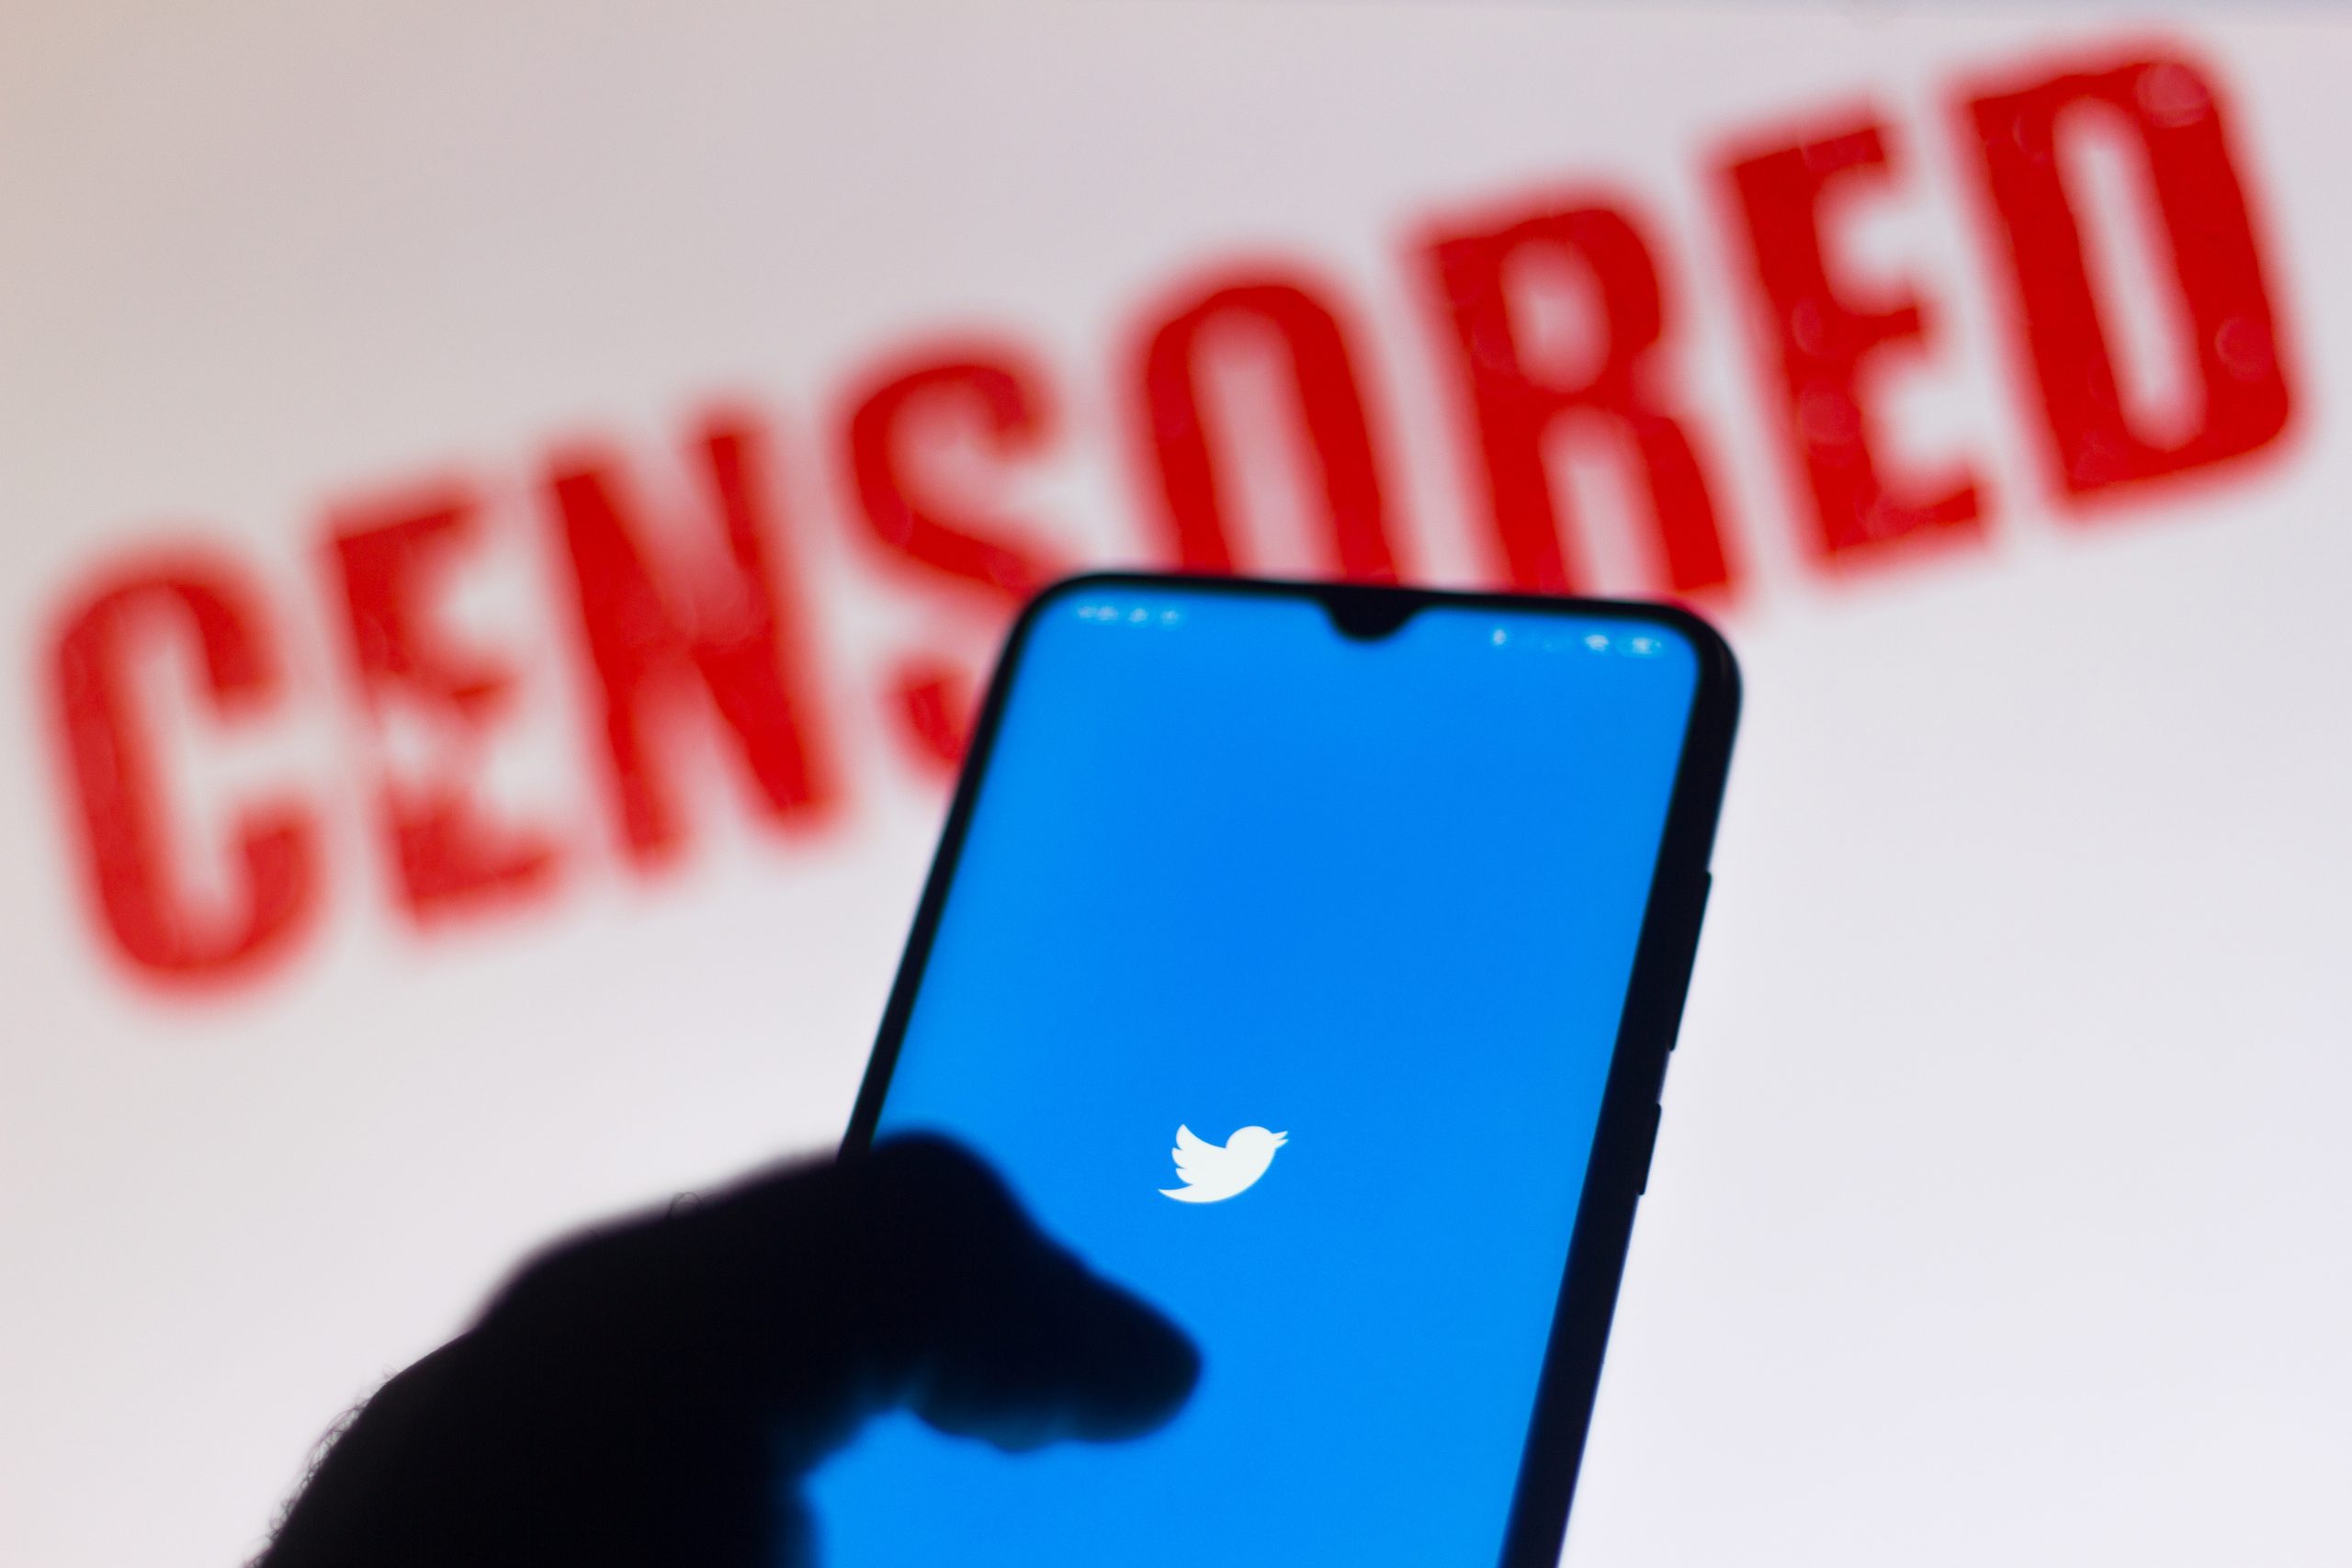 UPDATE: The Center for American Liberty Urges Court to Protect Free Speech in Landmark Social Media Censorship Case